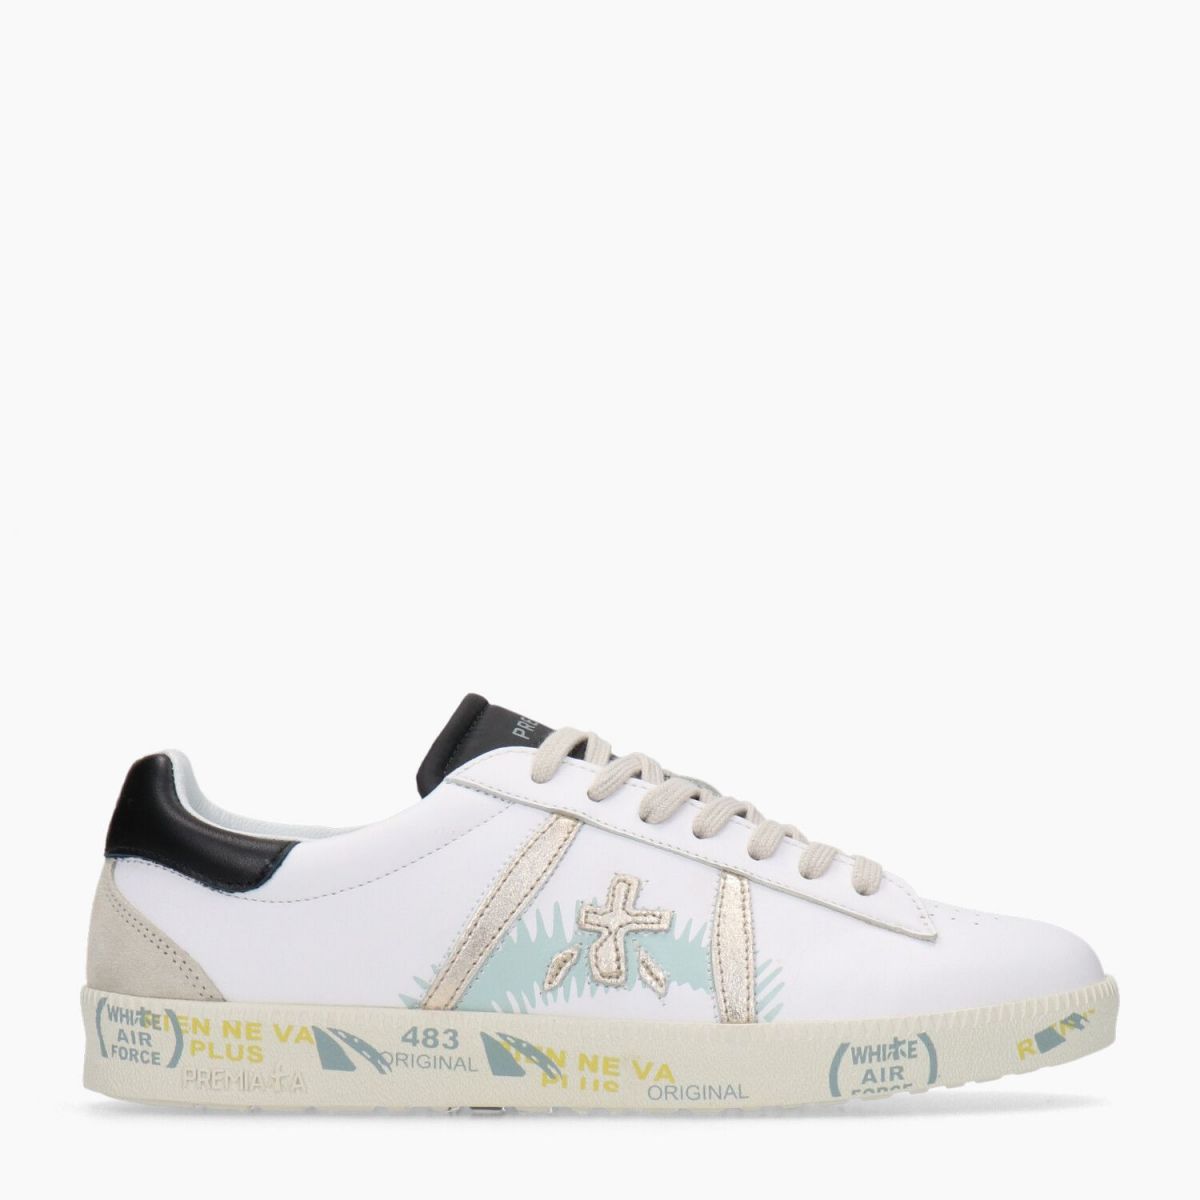 Premiata Sneakers Andy-D Bianco ANDYD-5747-BIANCO-022